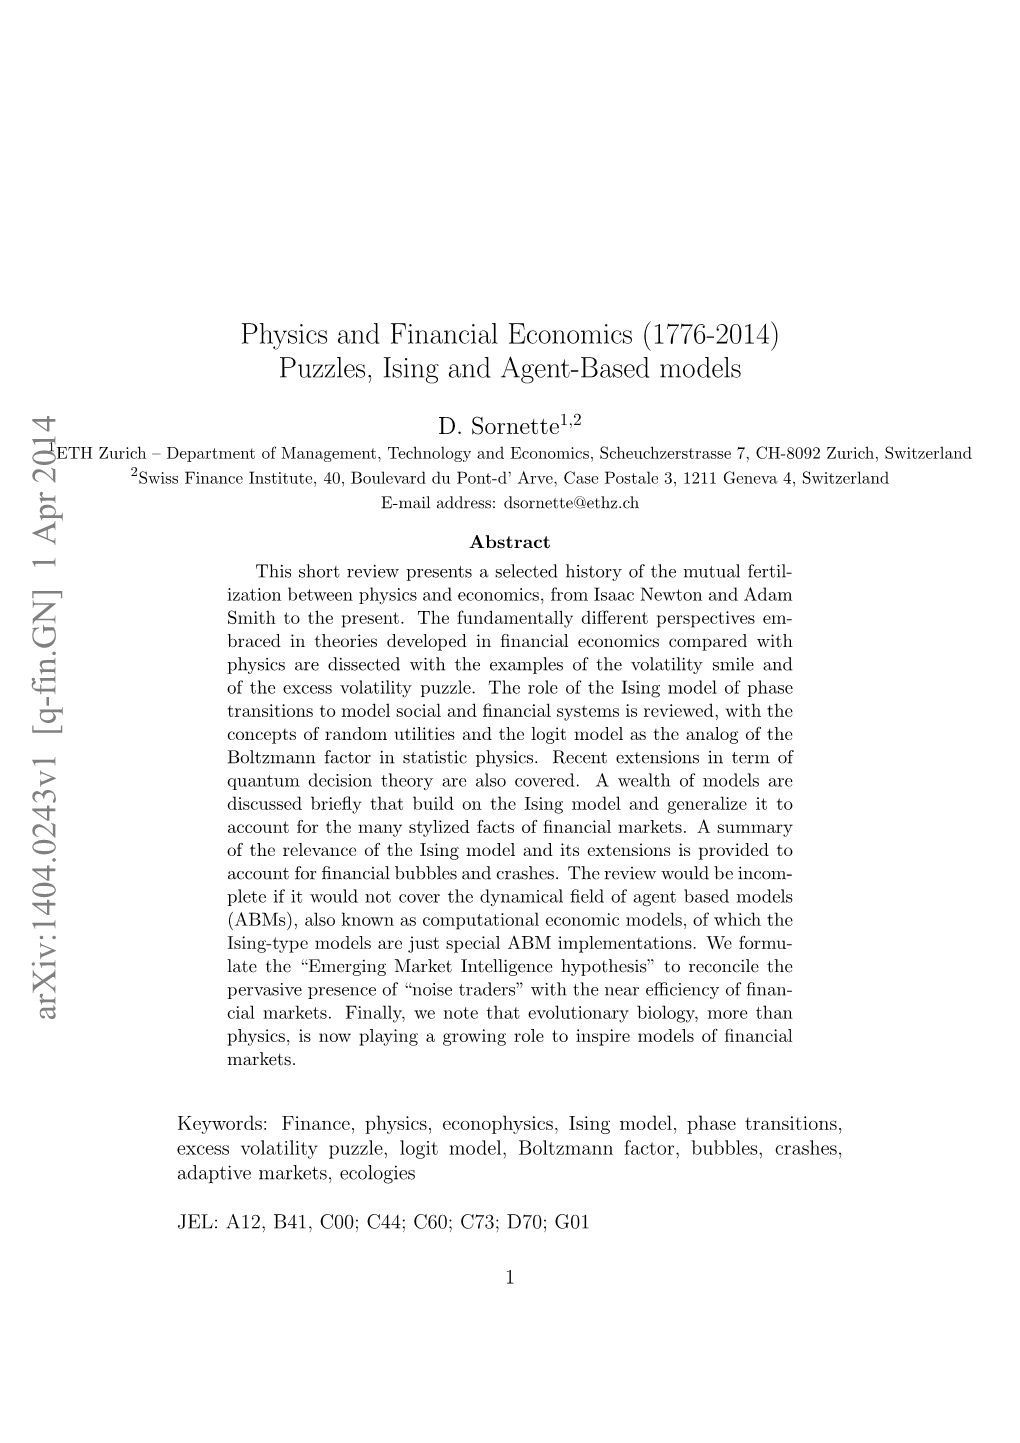 (1776-2014) Puzzles, Ising and Agent-Based Models